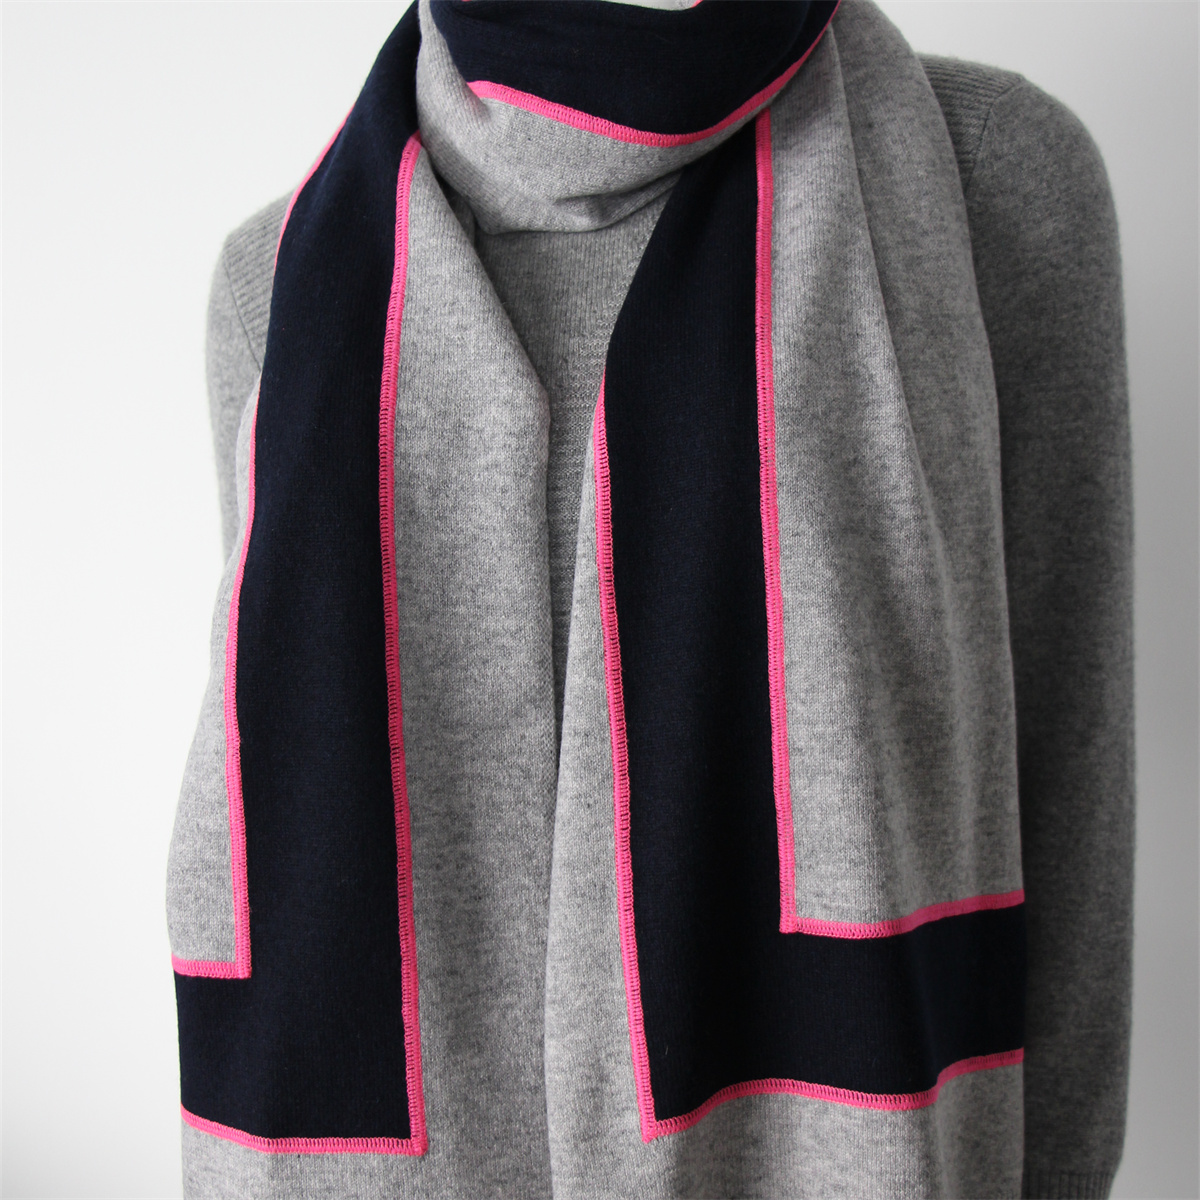 ribbed cashmere scarf